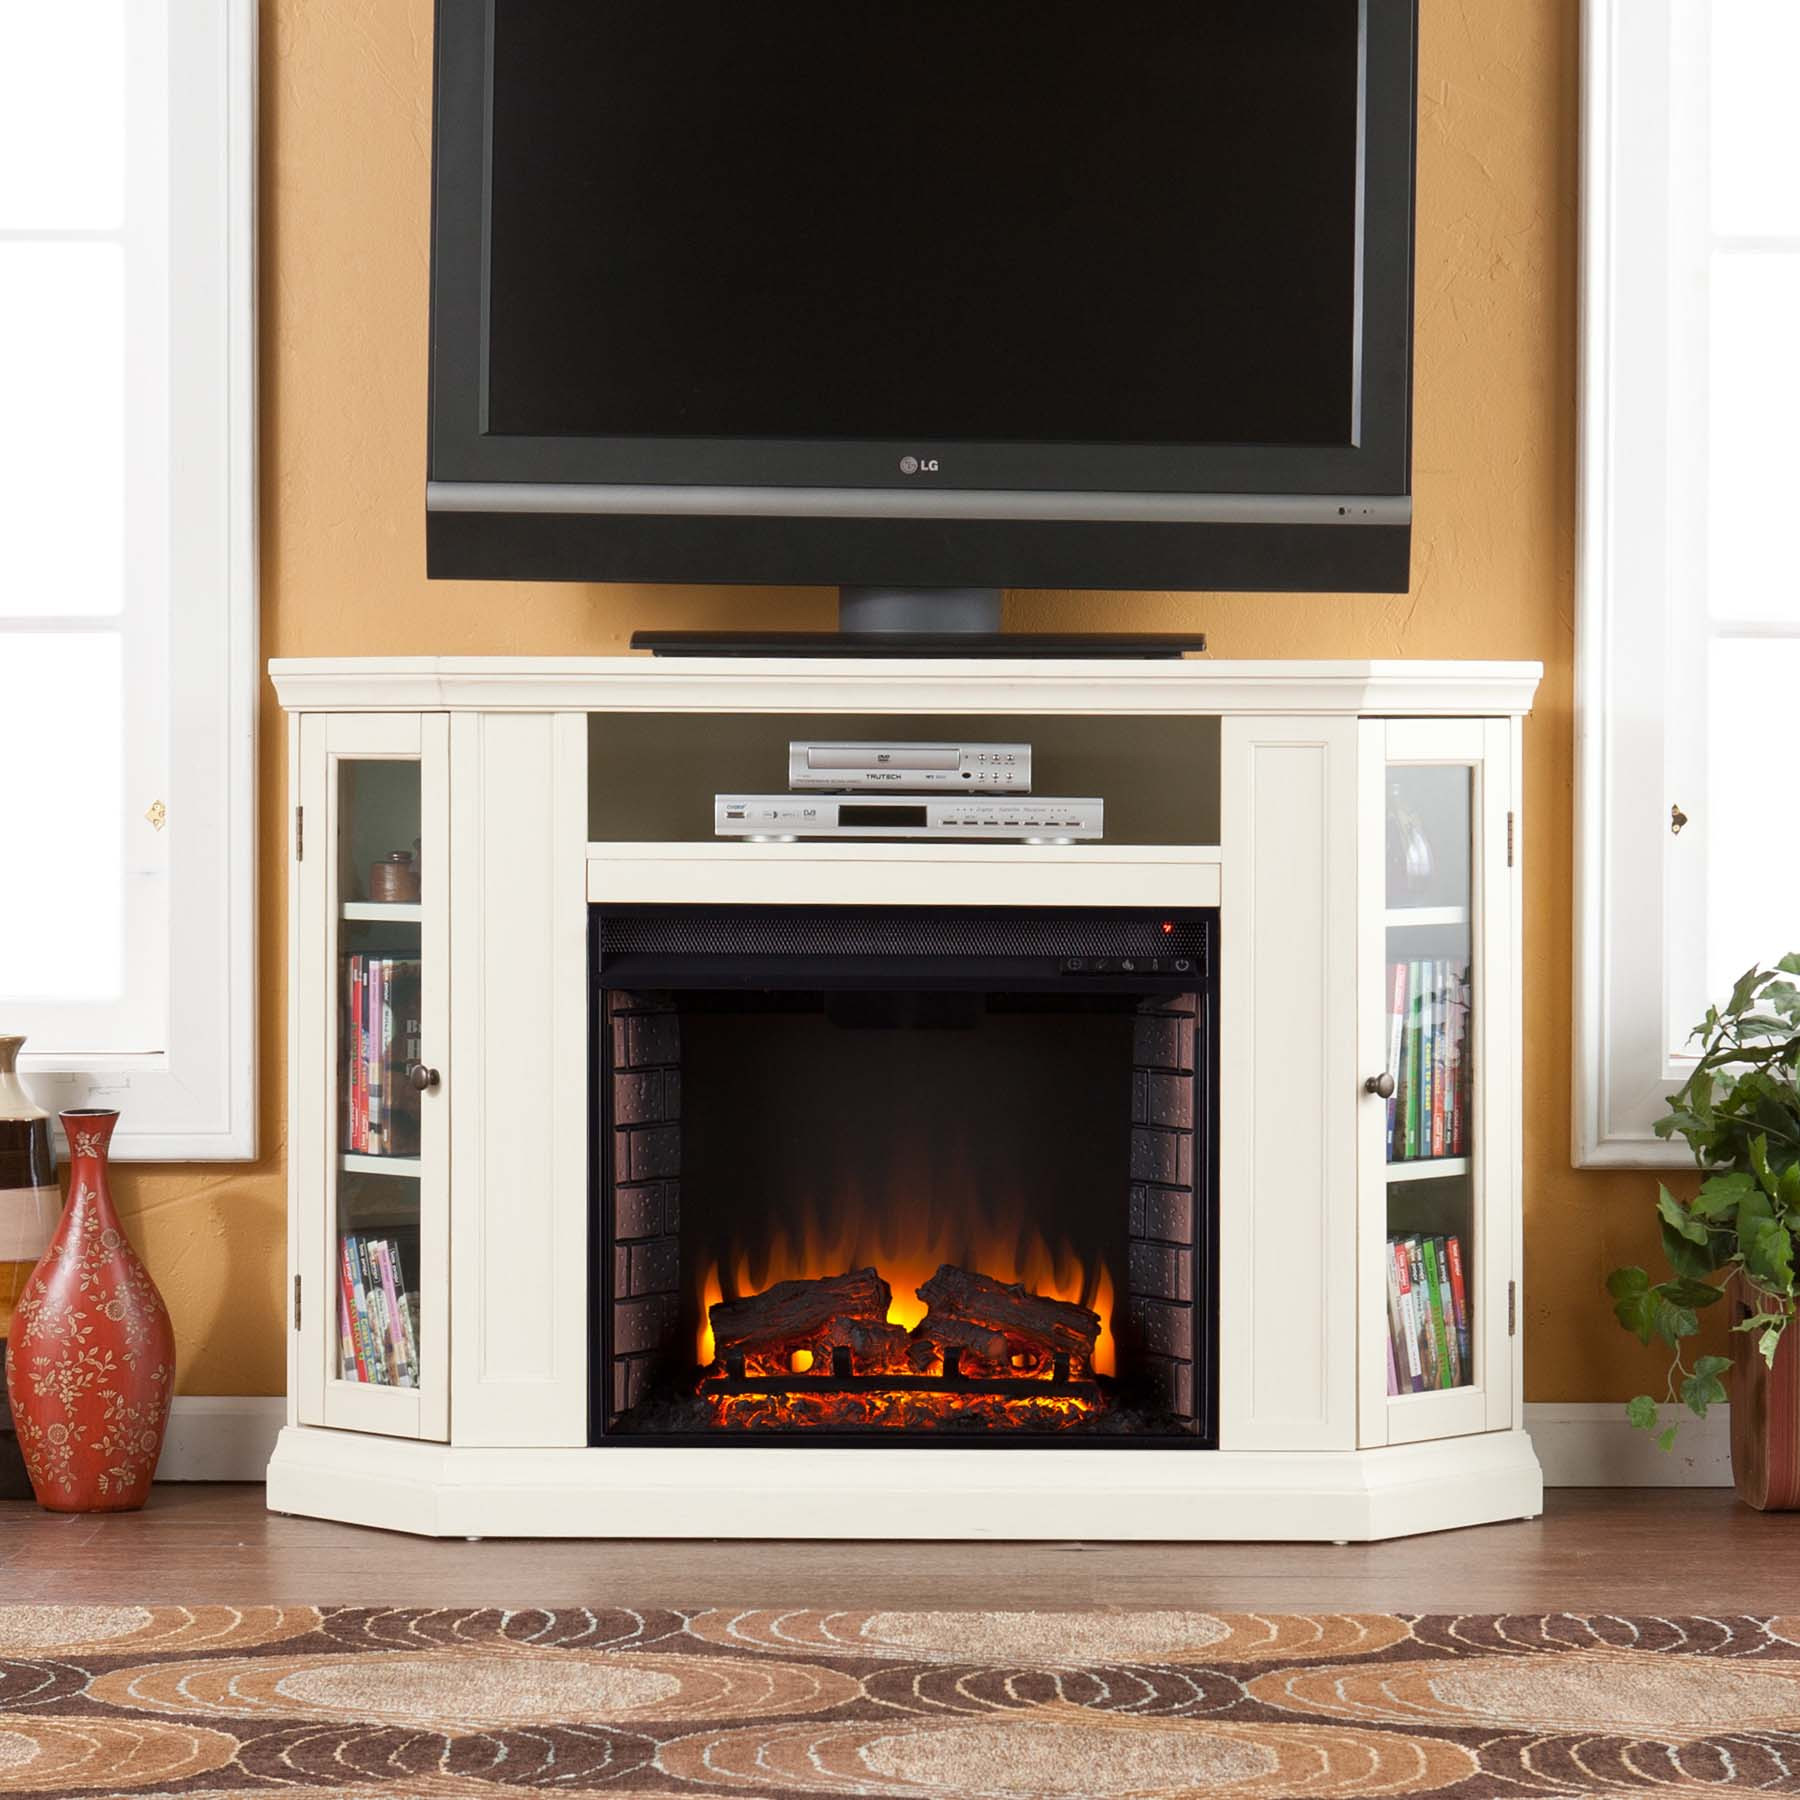 48 Electric Fireplace
 Tips for Buying an Electric Fireplace